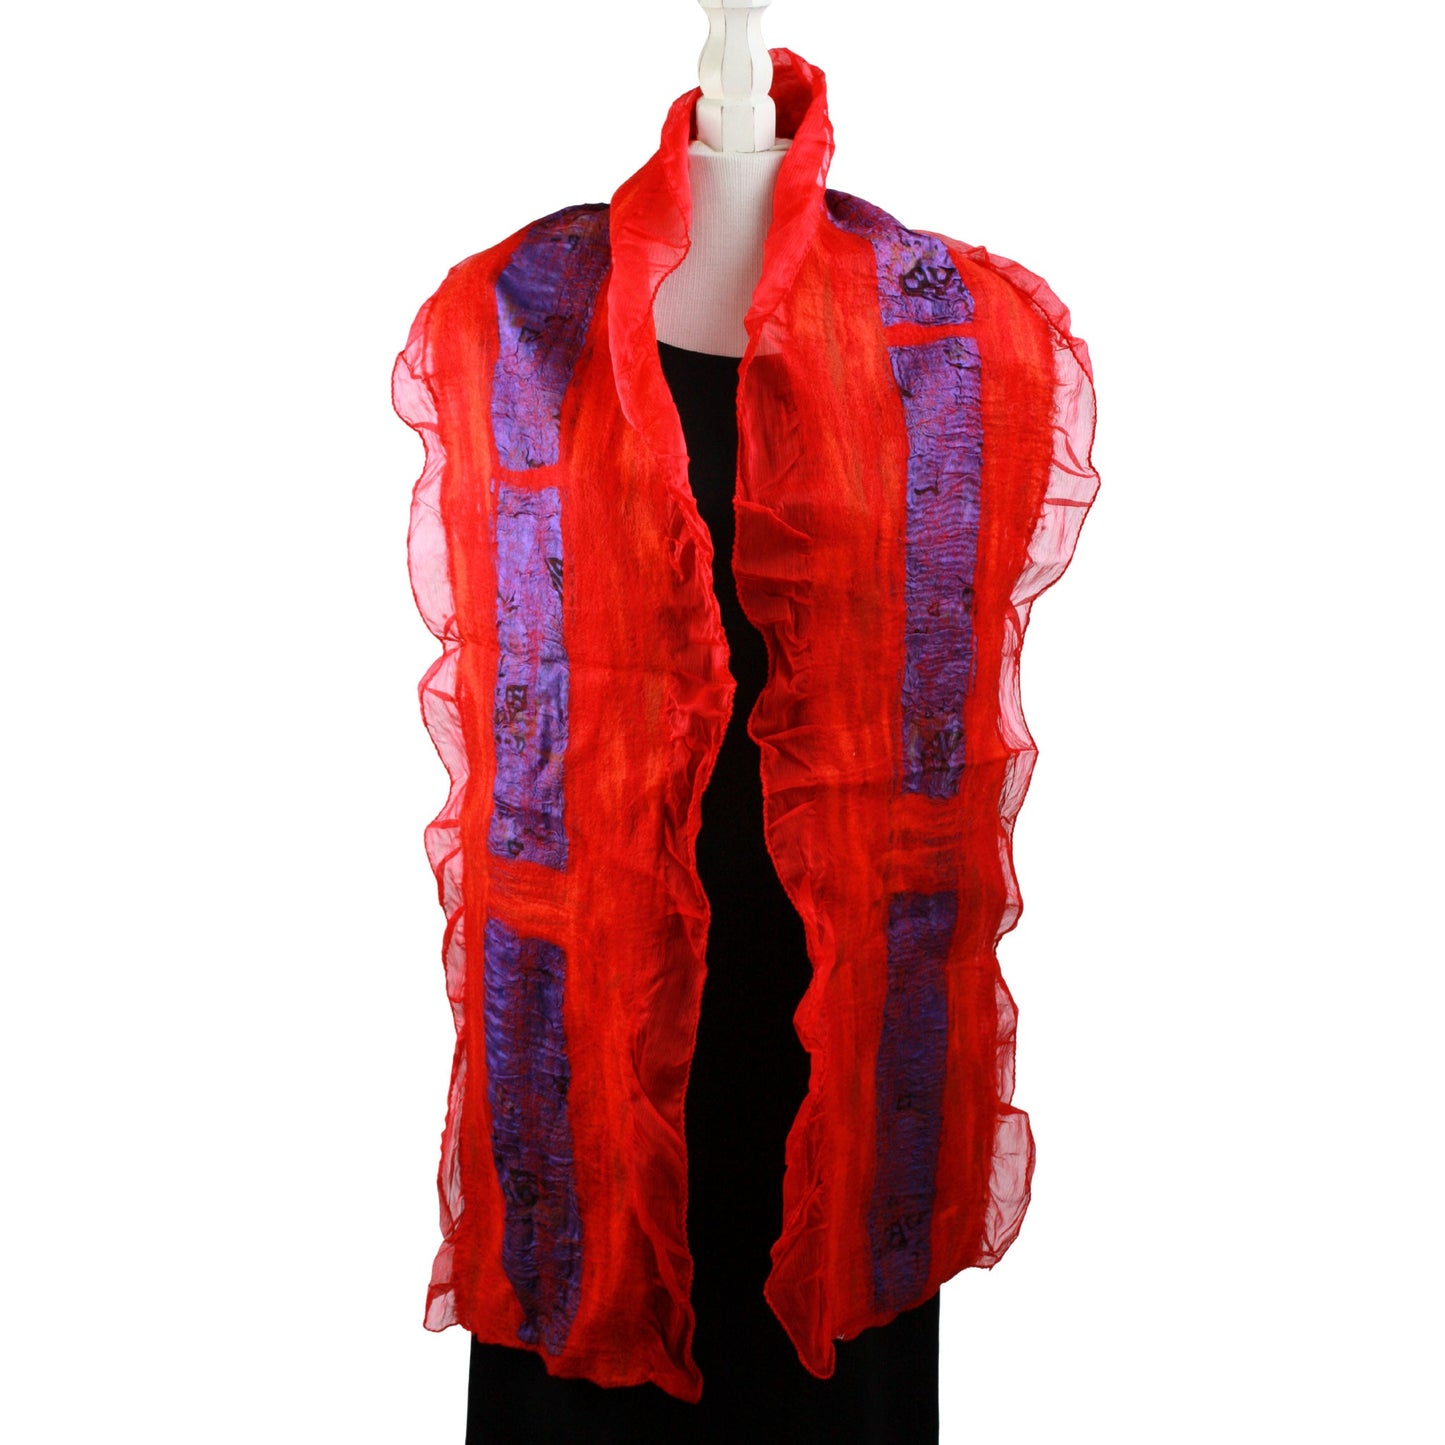 Sari collage scarf in red, purple and black